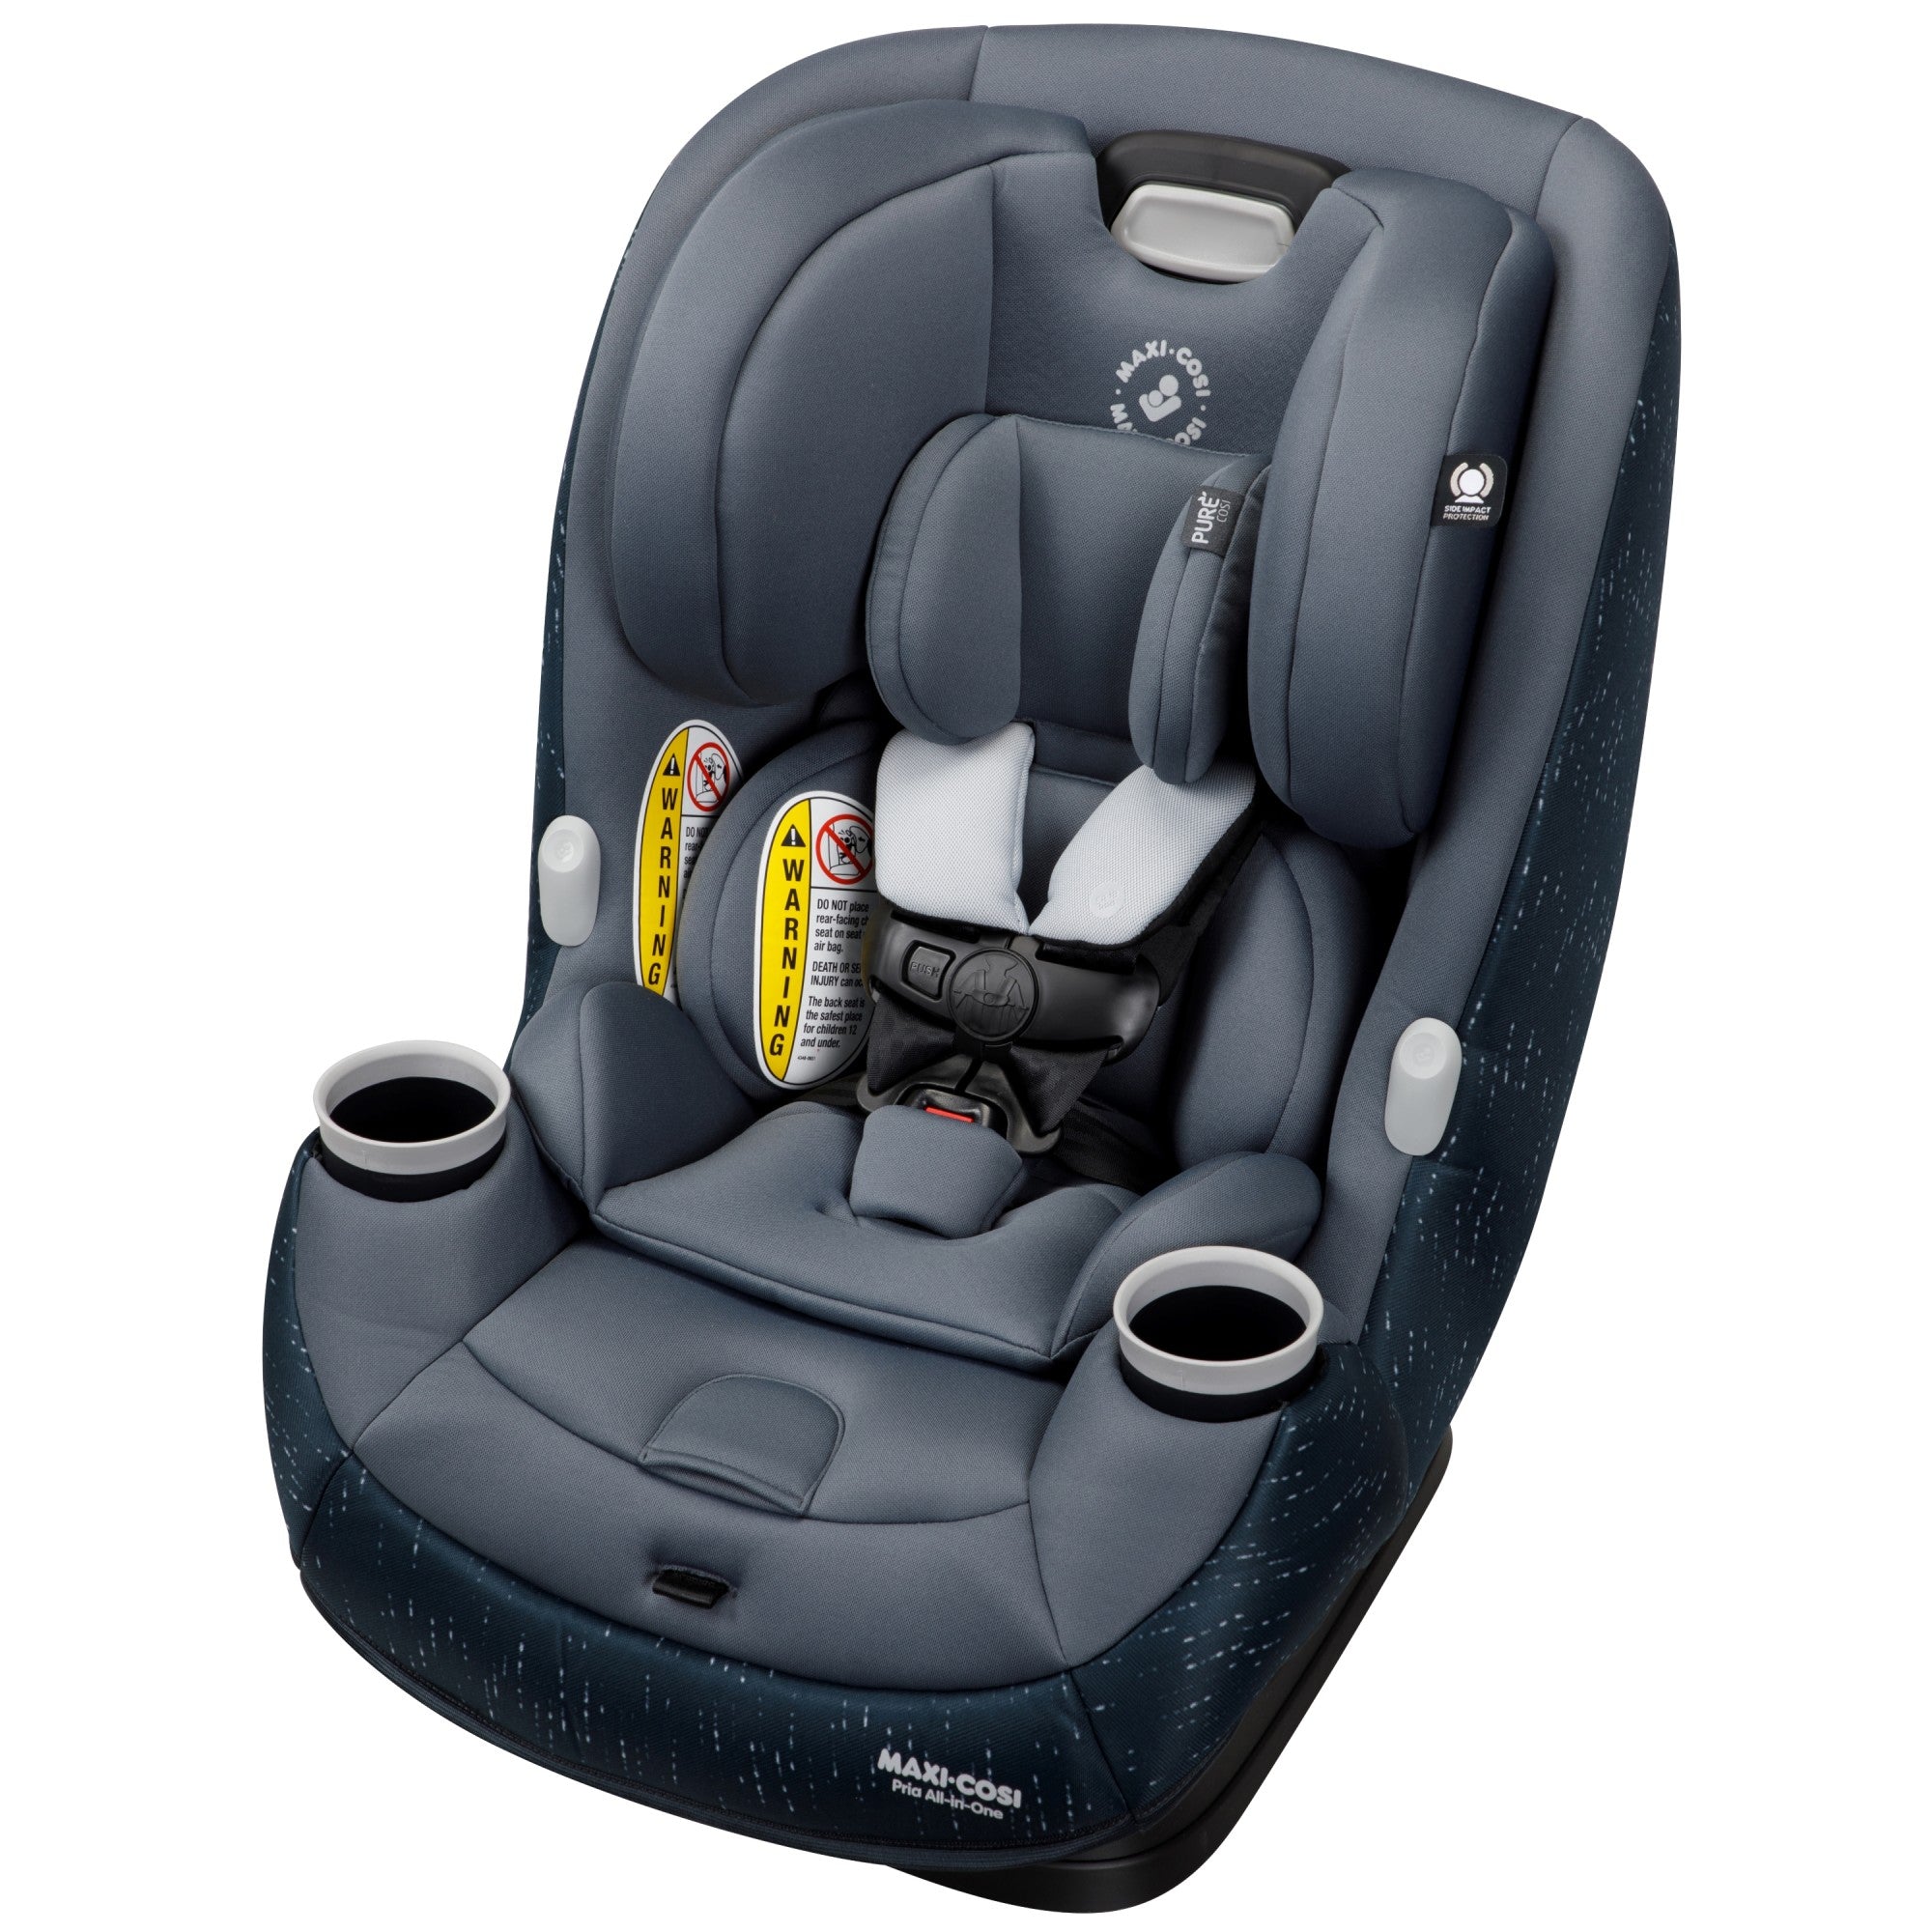 Pria™ All-in-One Convertible Car Seat - Sonar Grey - 45 degree angle view of left side